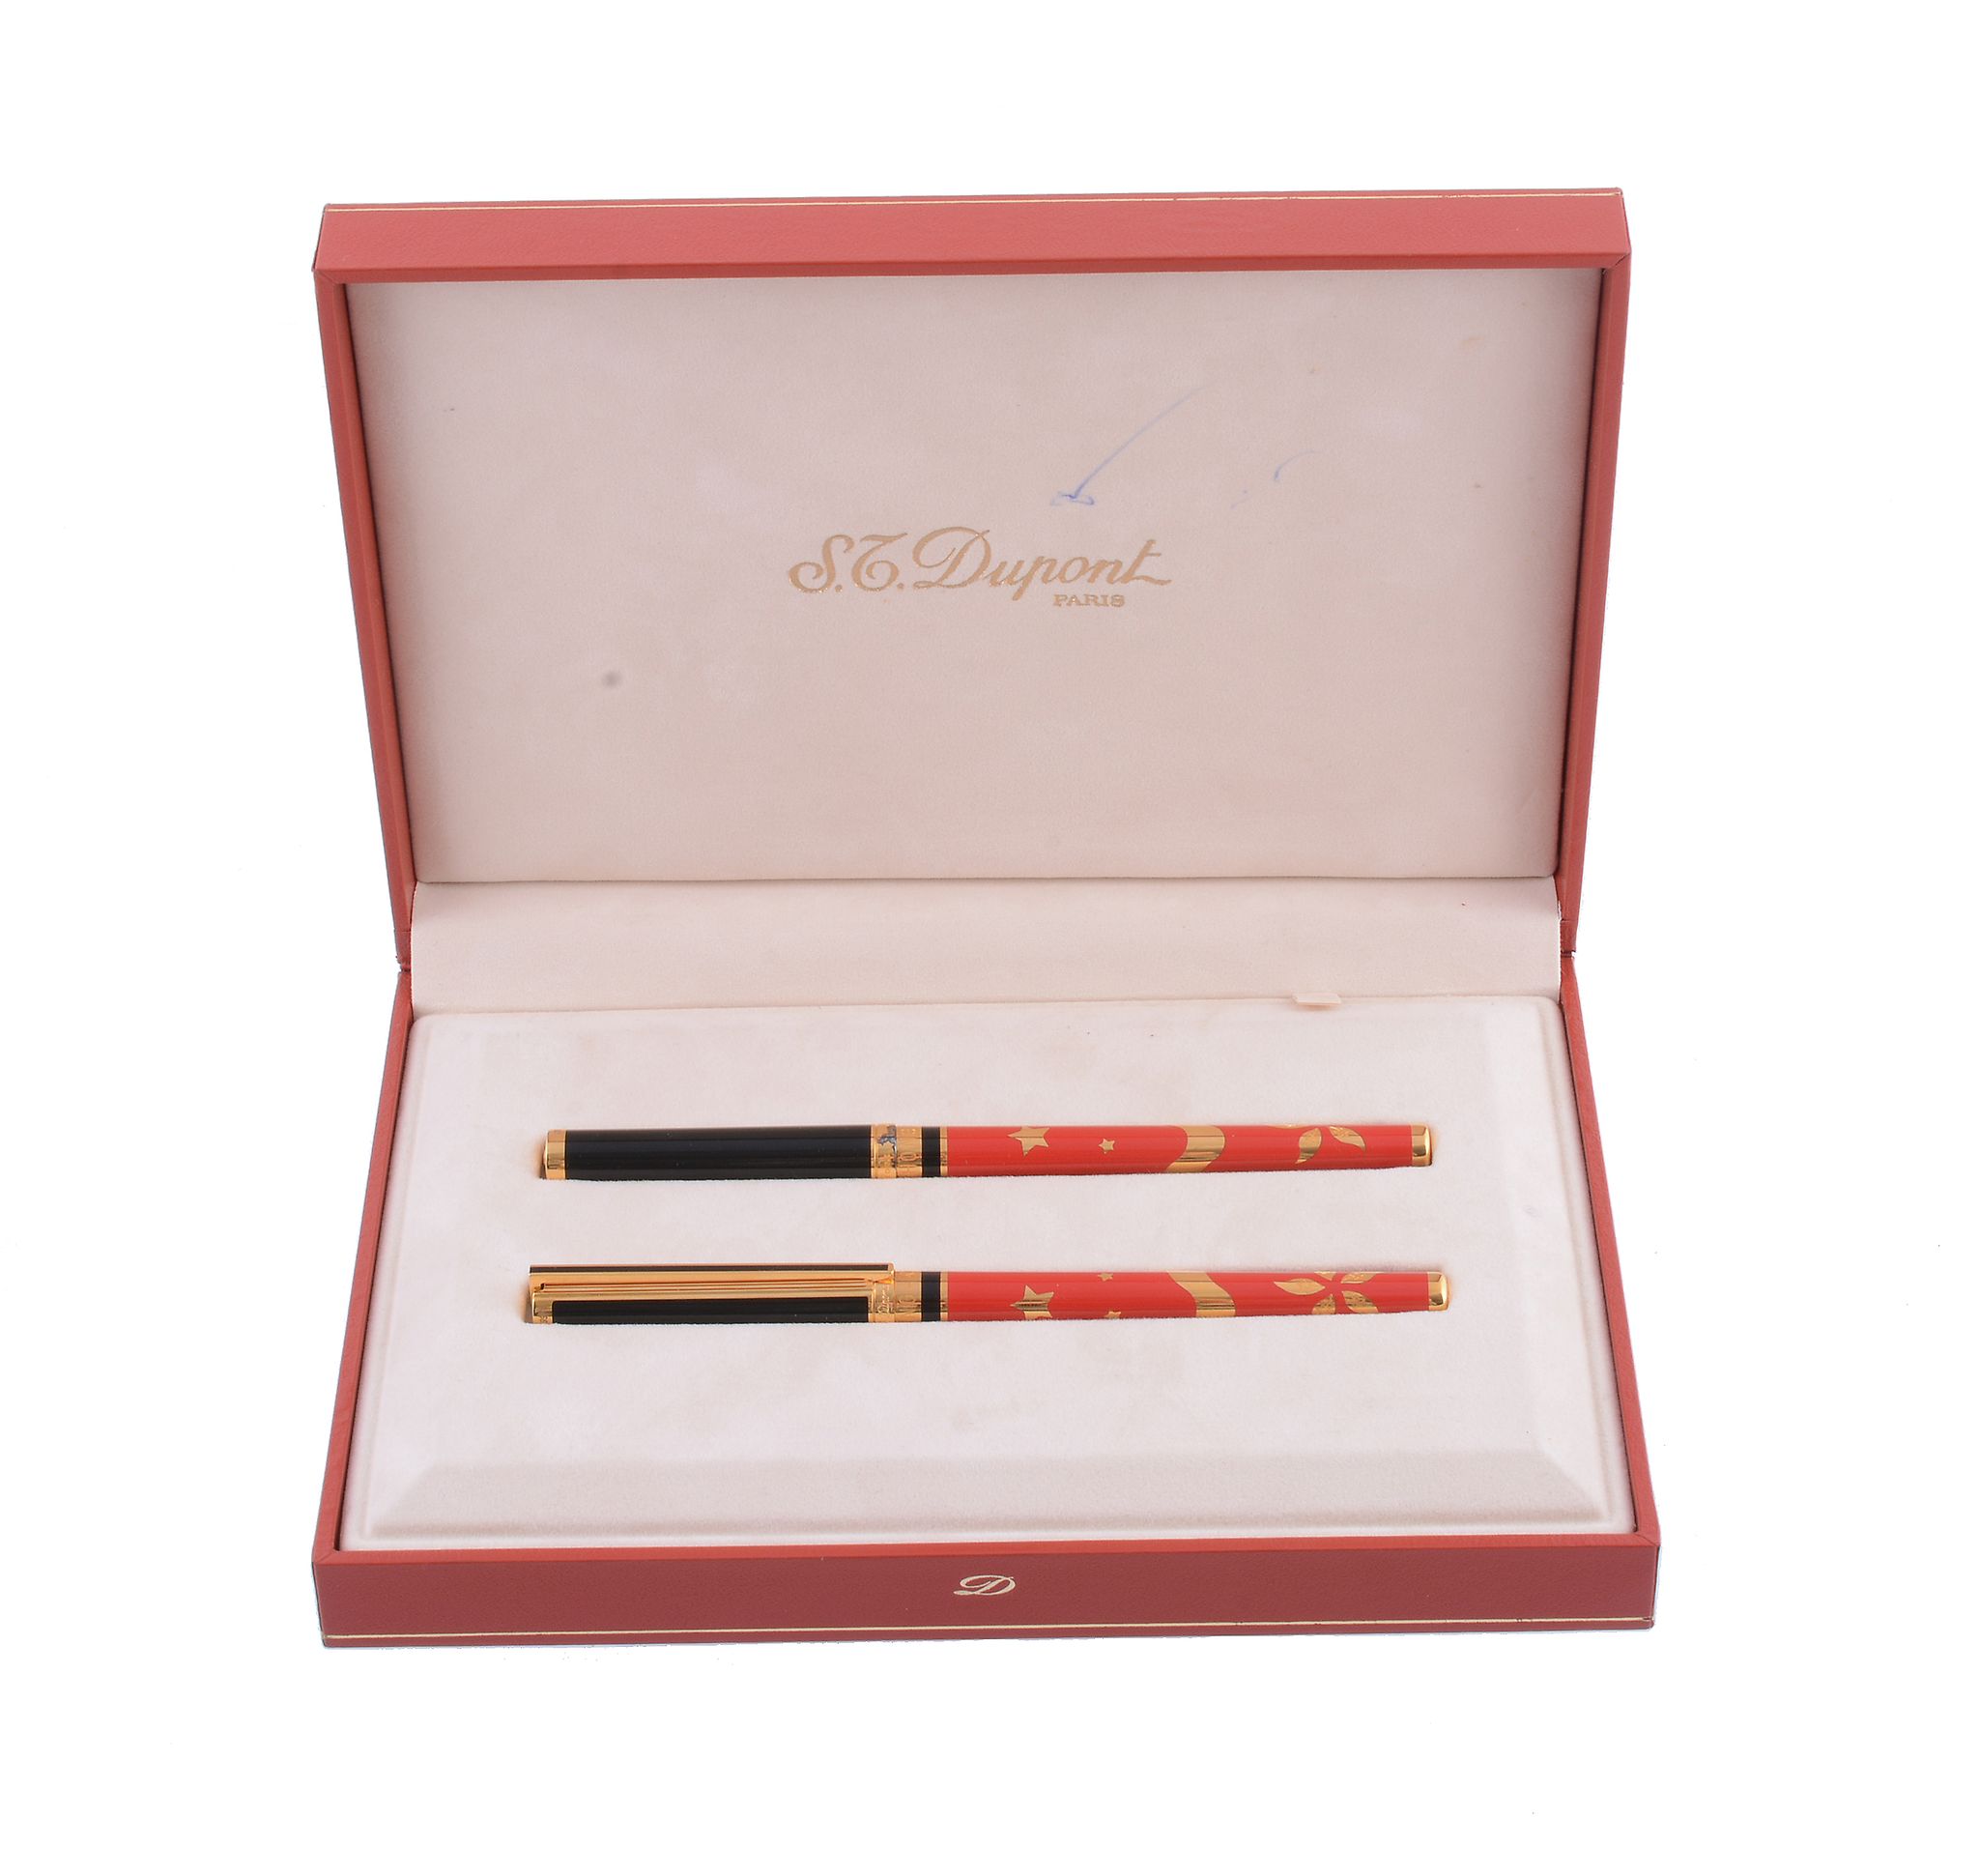 S. T. Dupont, Hong Kong 1997, a limited edition laque de chine fountain pen and ball point pen,